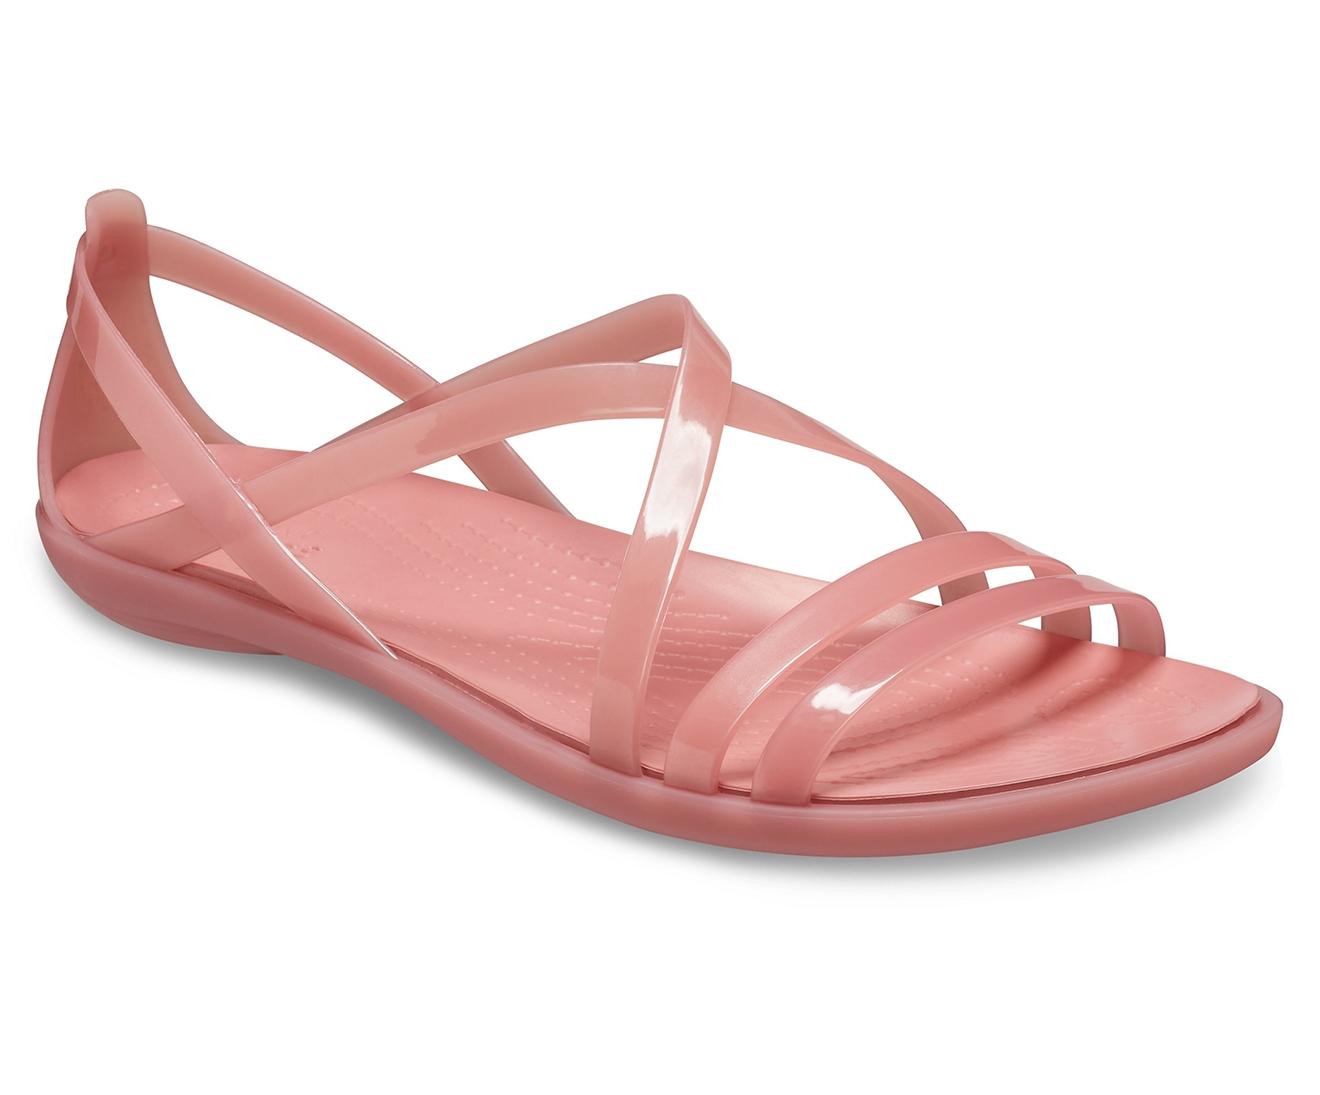 Crocs™ Isabella Strappy Sandal in Blossom (Pink) - Lyst